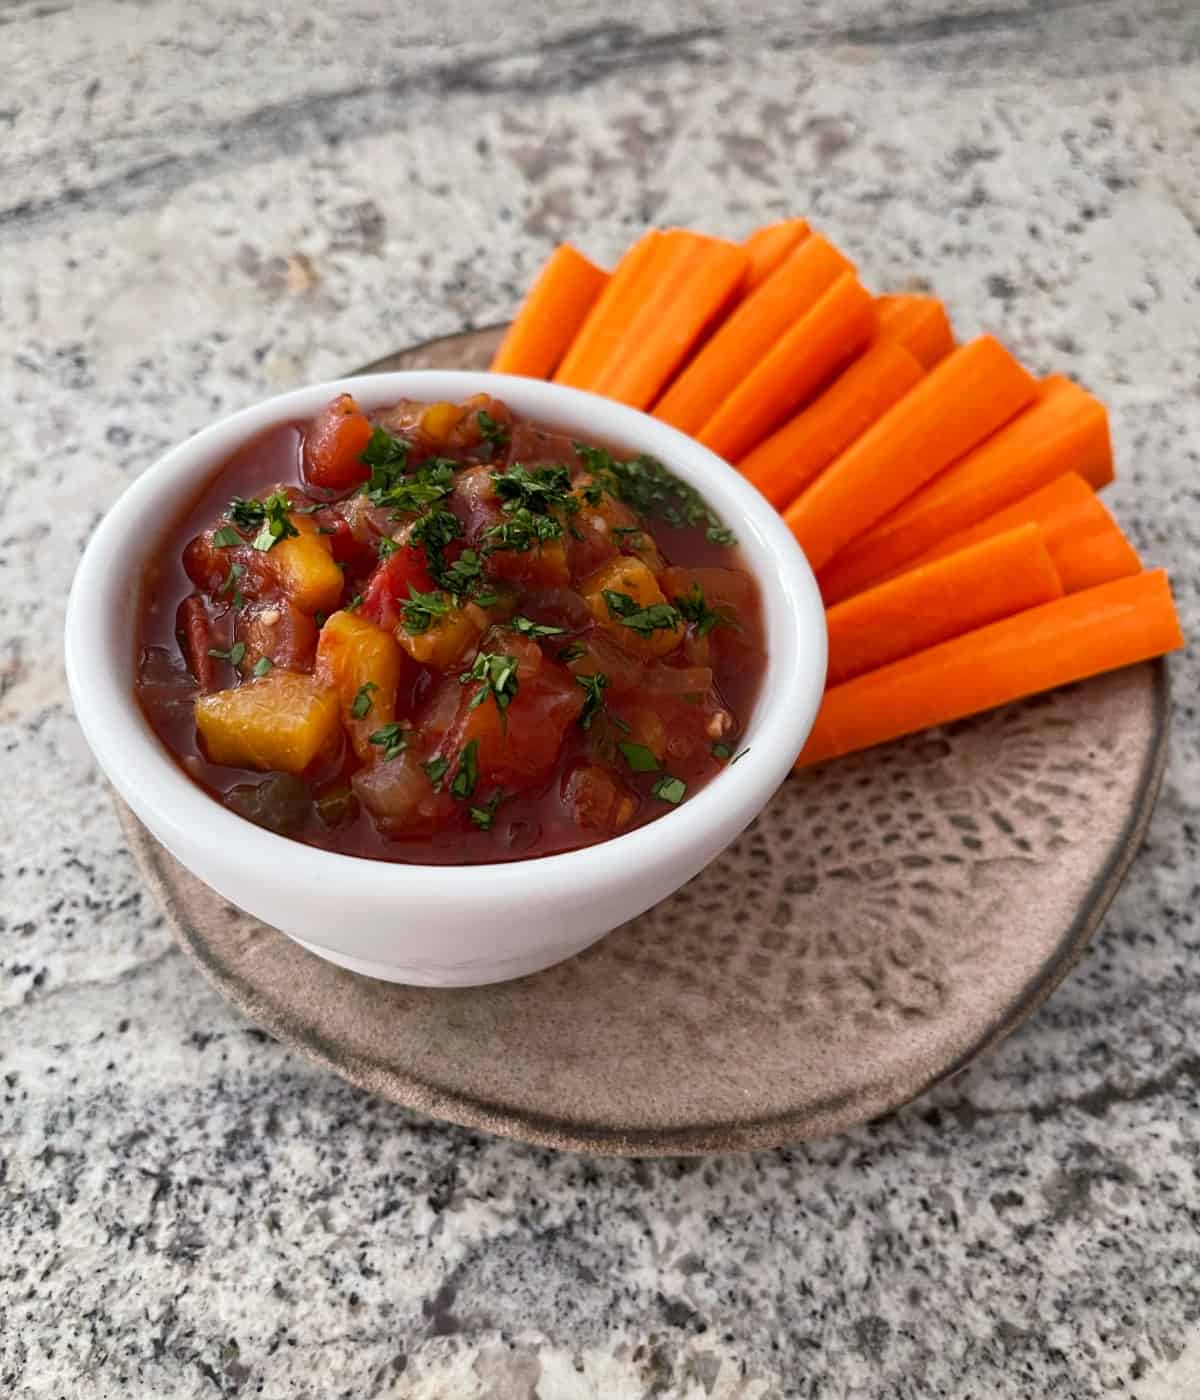 Slow cooked fresh peach salsa in small white serving bowl with carrot sticks.